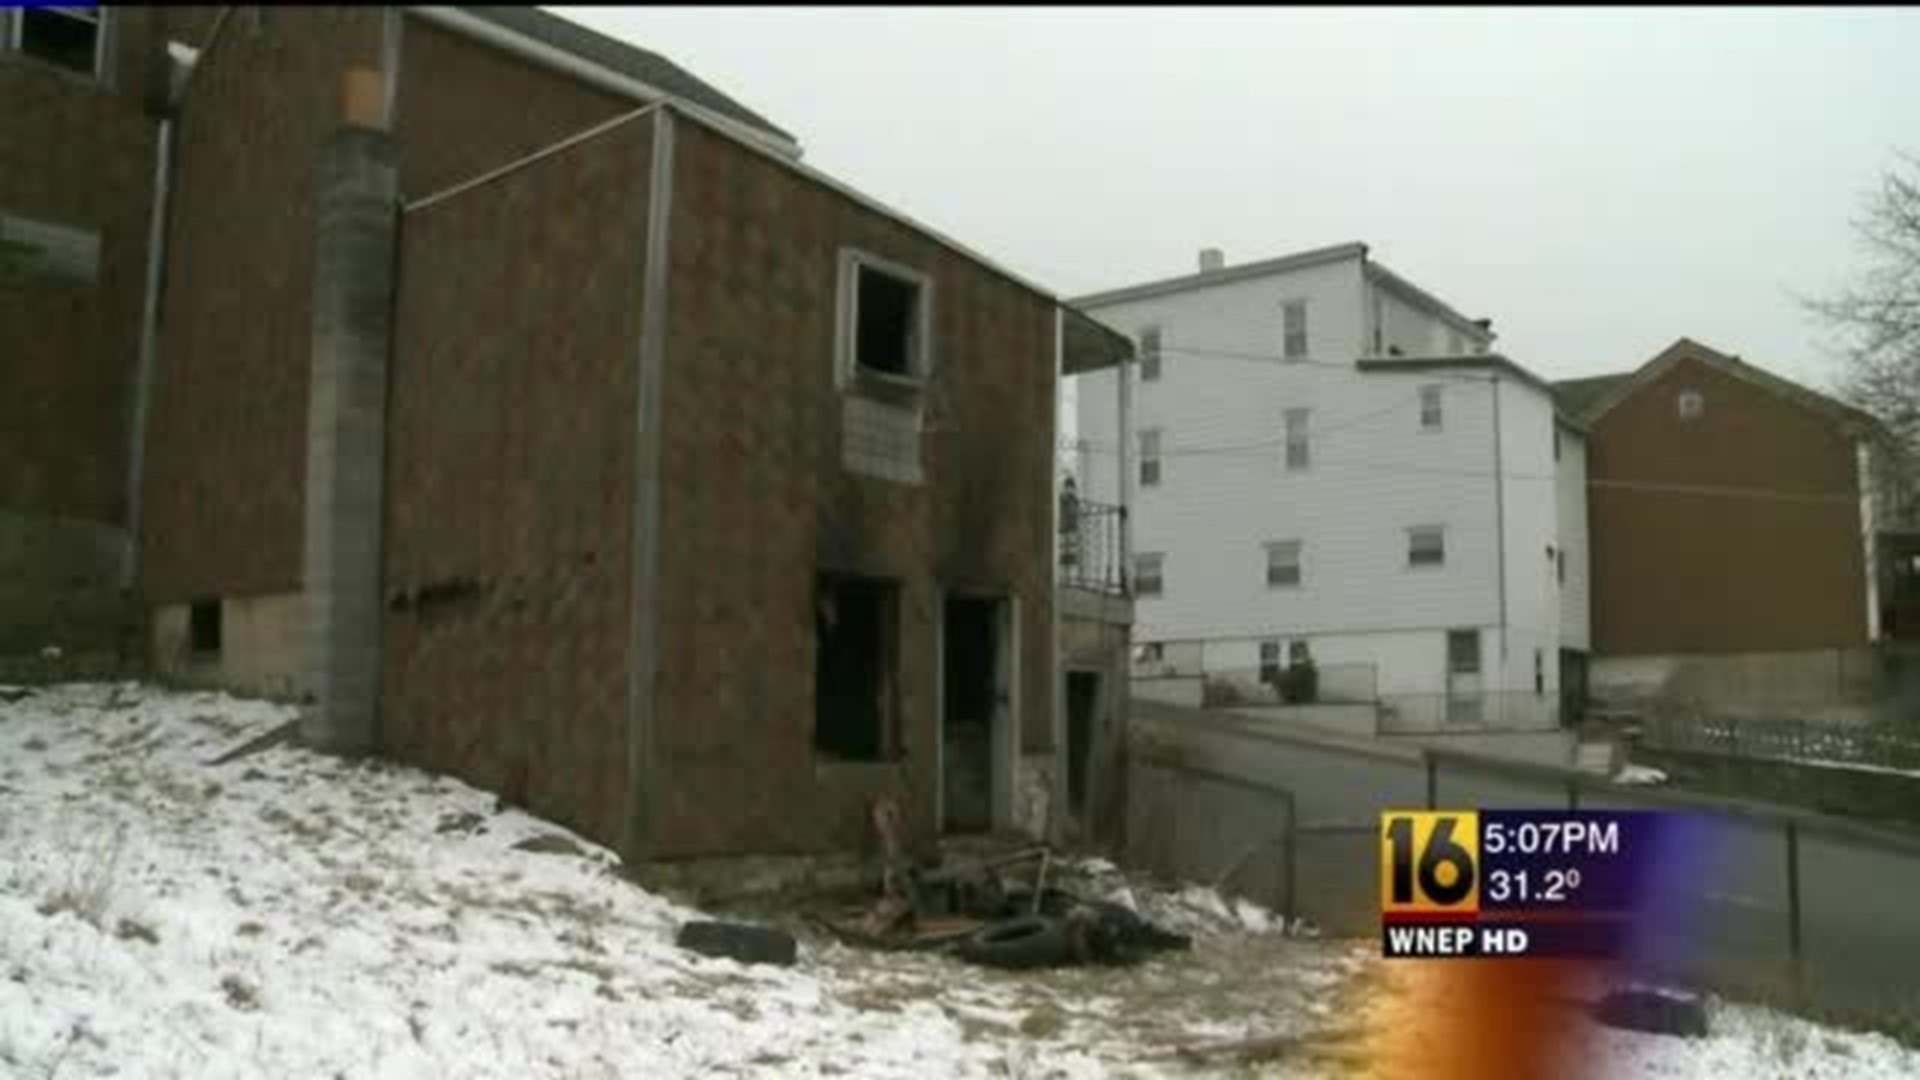 13-Year-Old Arrested For Arson